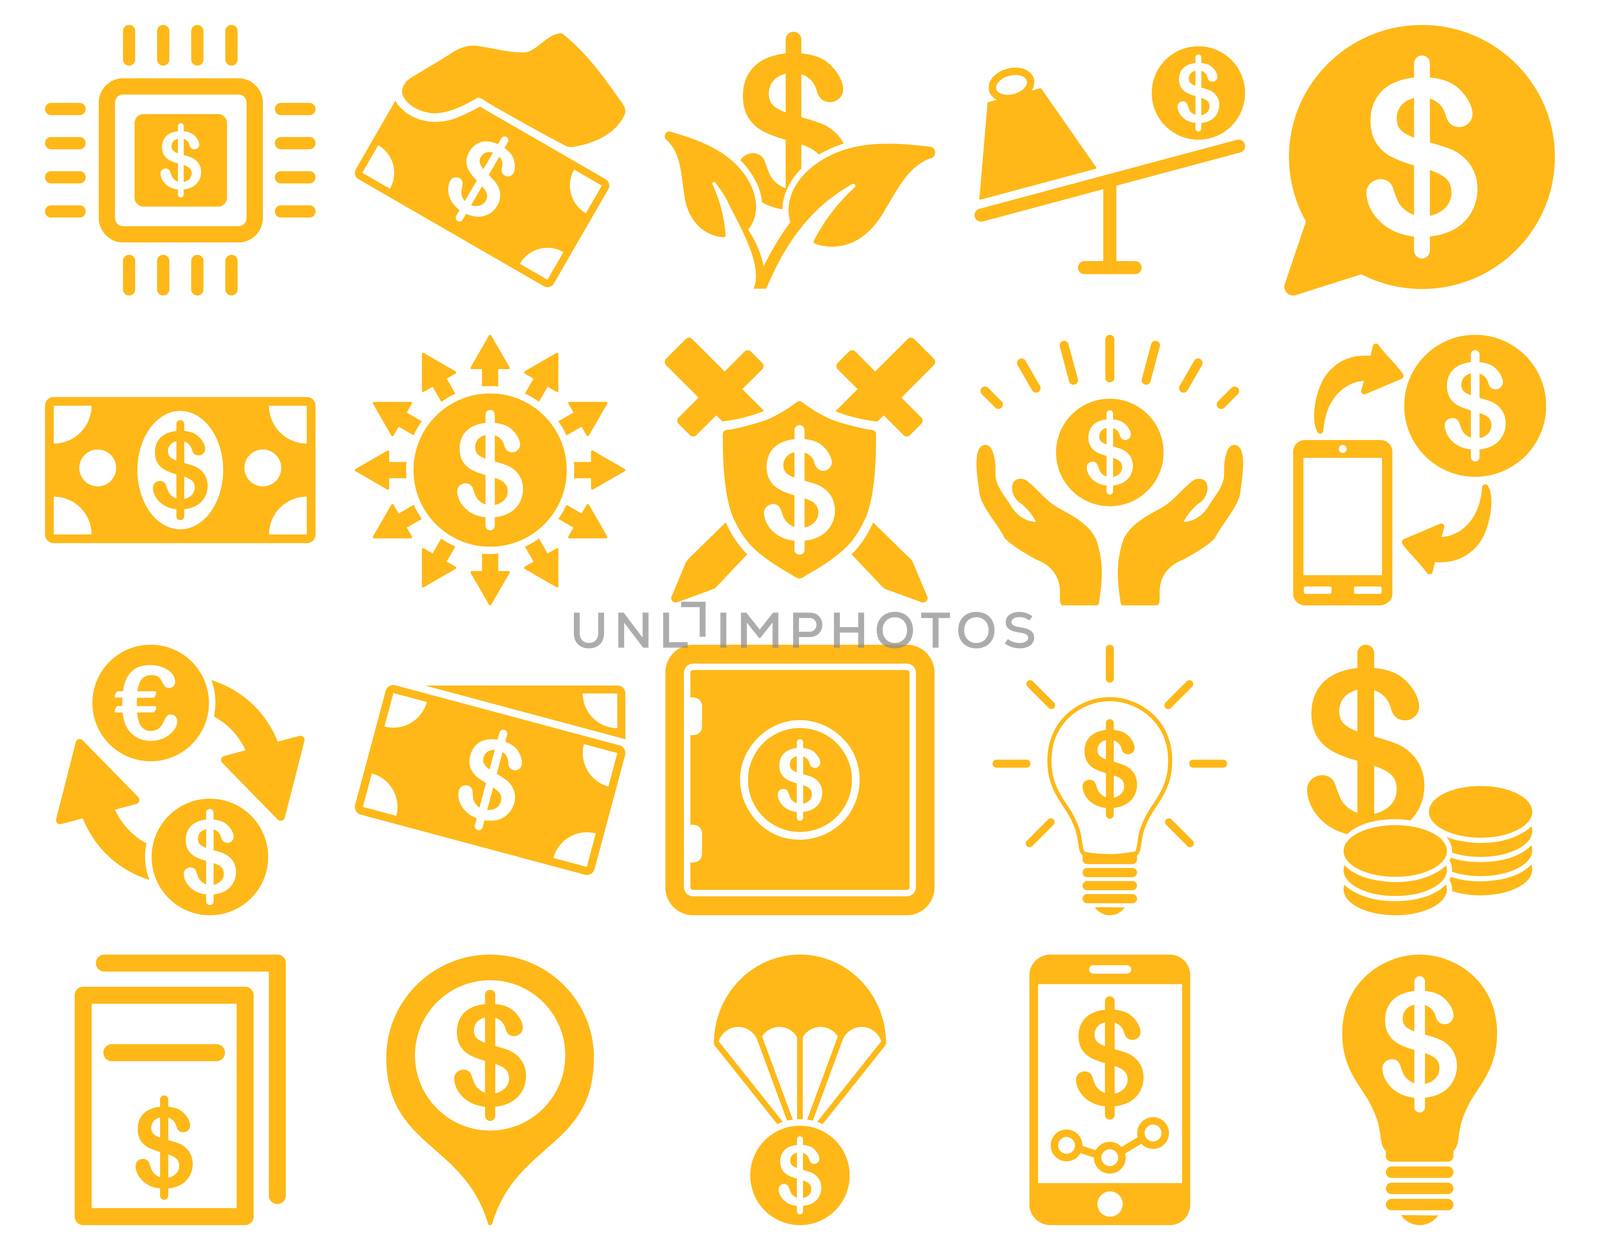 Dollar Icon Set. These flat icons use yellow color. Raster images are isolated on a white background.